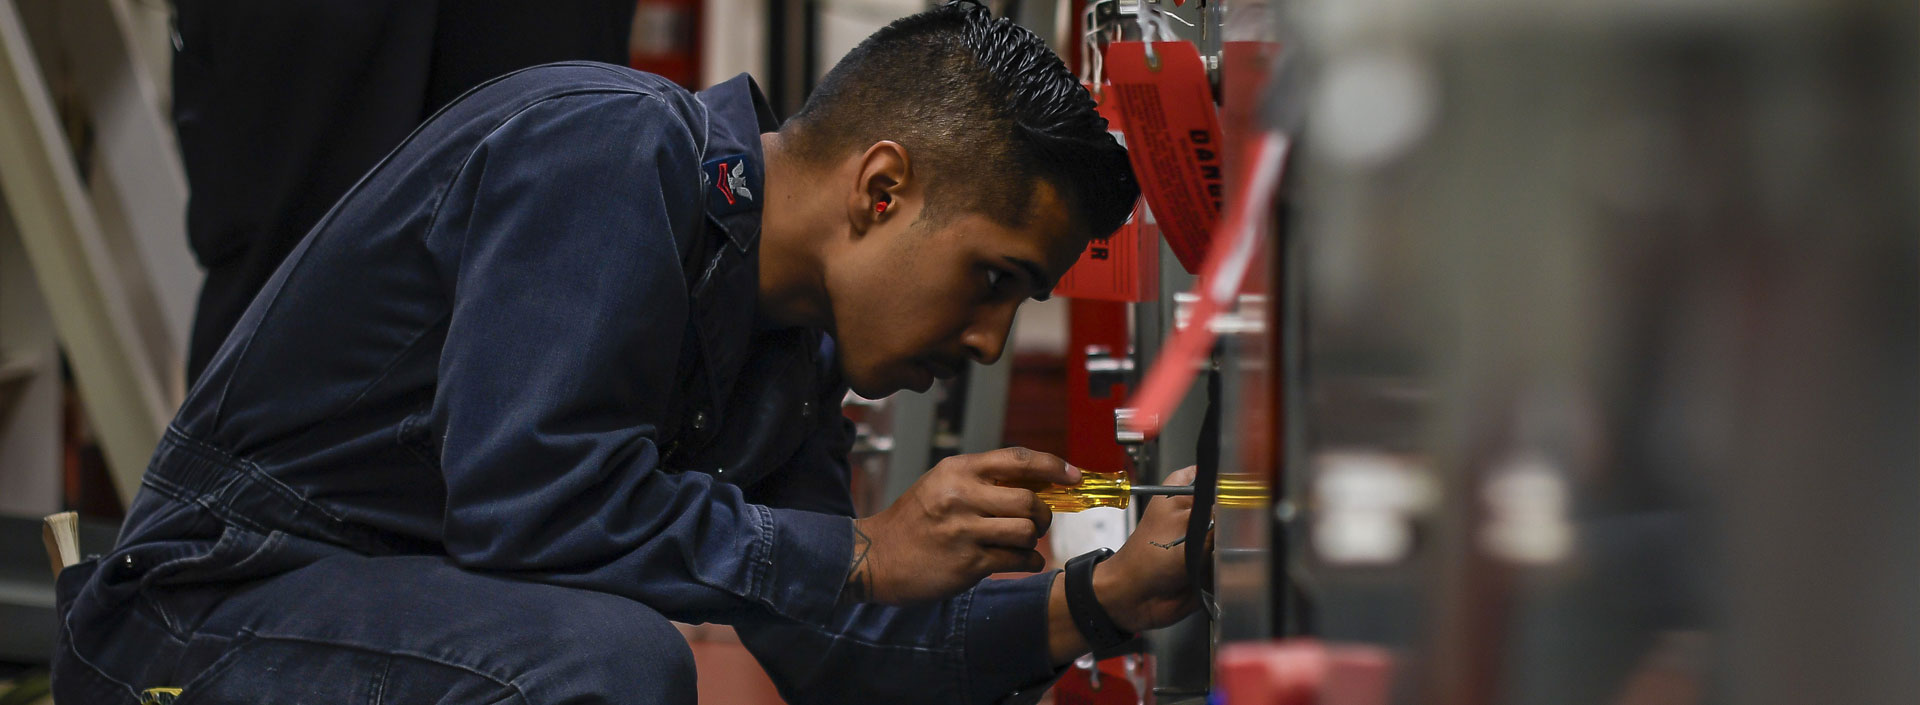 Careers for Navy Electricians through Orion Talent